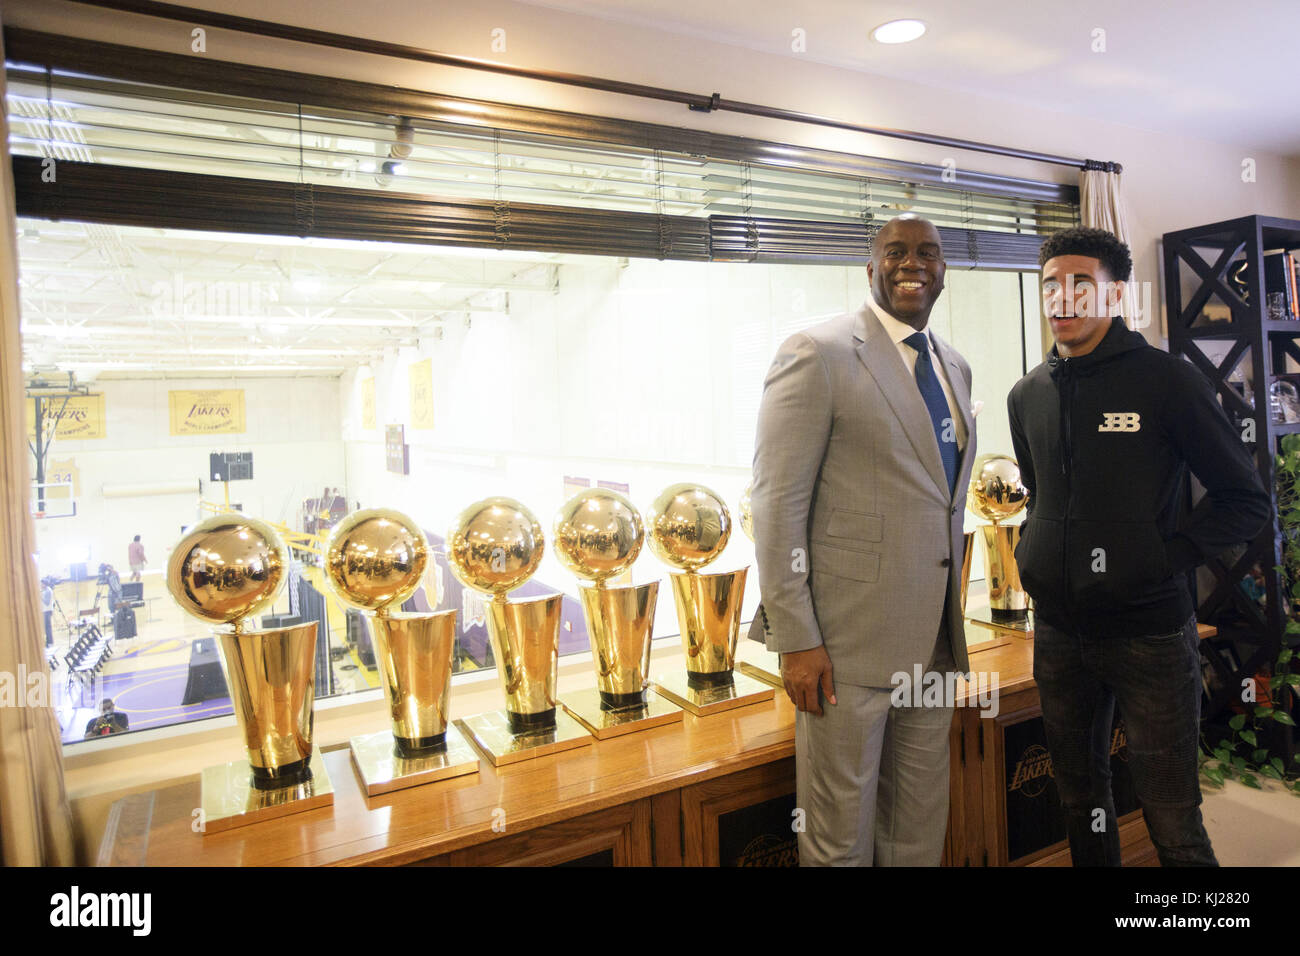 El Segundo, California, USA. 23rd June, 2017. Lakers draft pick Lonzo Ball  stands for a photograph with Magic Johnson and championship trophies at the  Lakers' Practice Facility on Friday, June 23, 2017